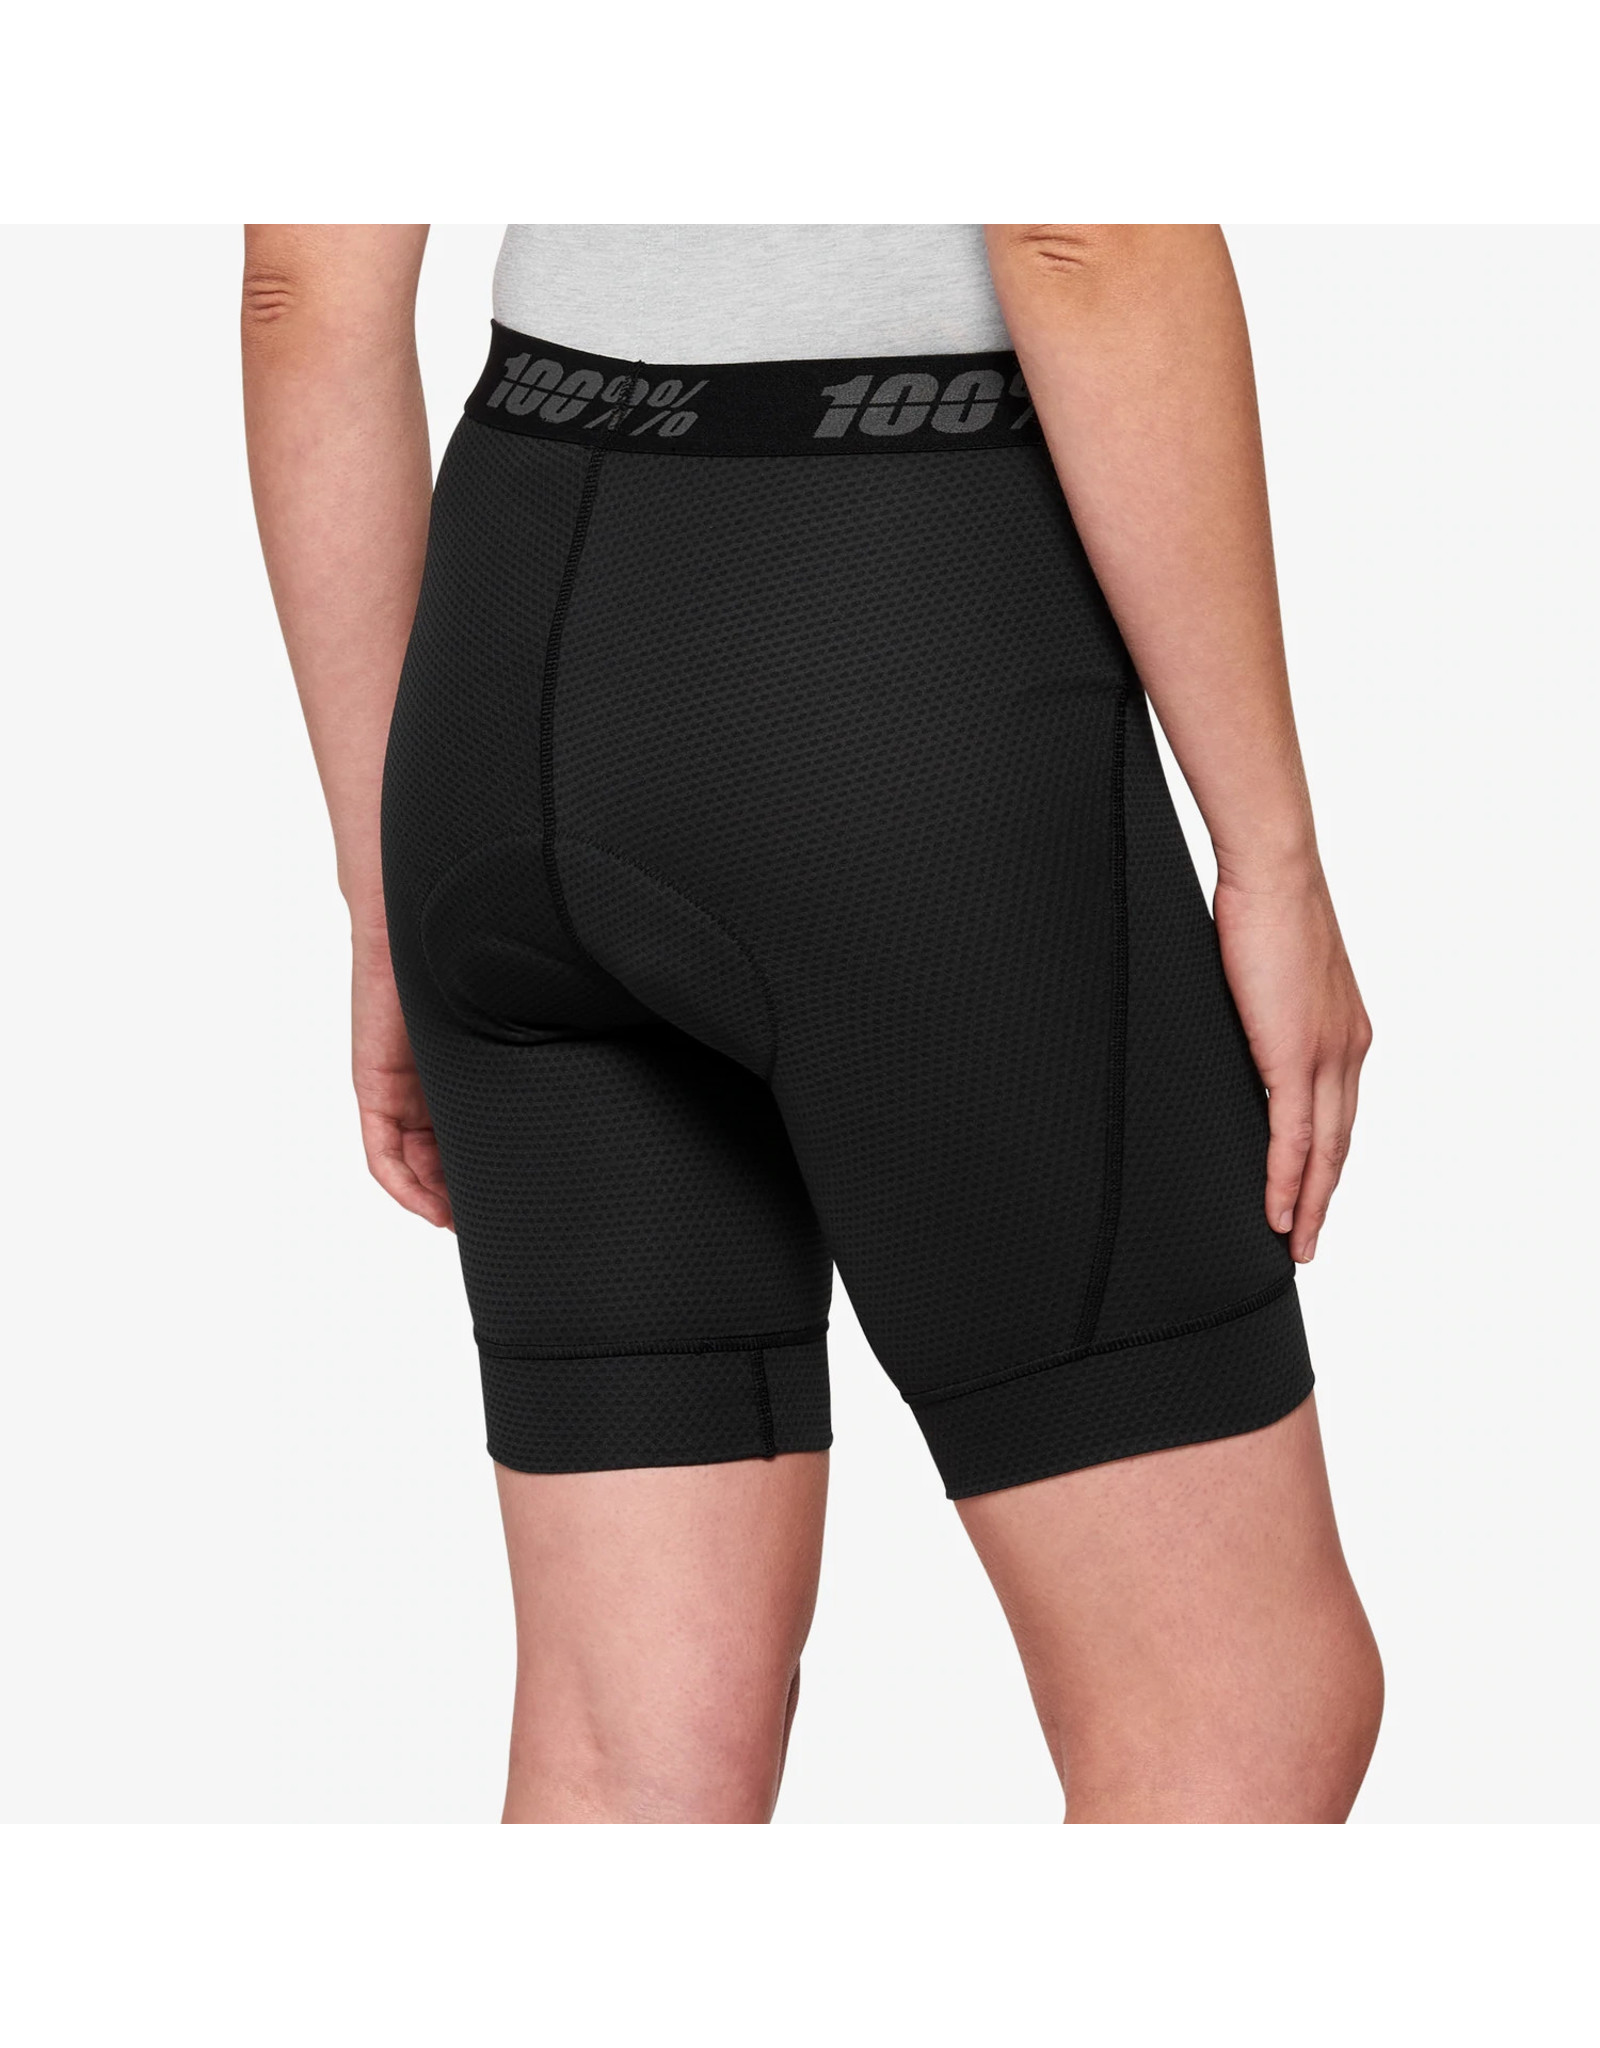 100% 100% Ridecamp Short Women's with Liner